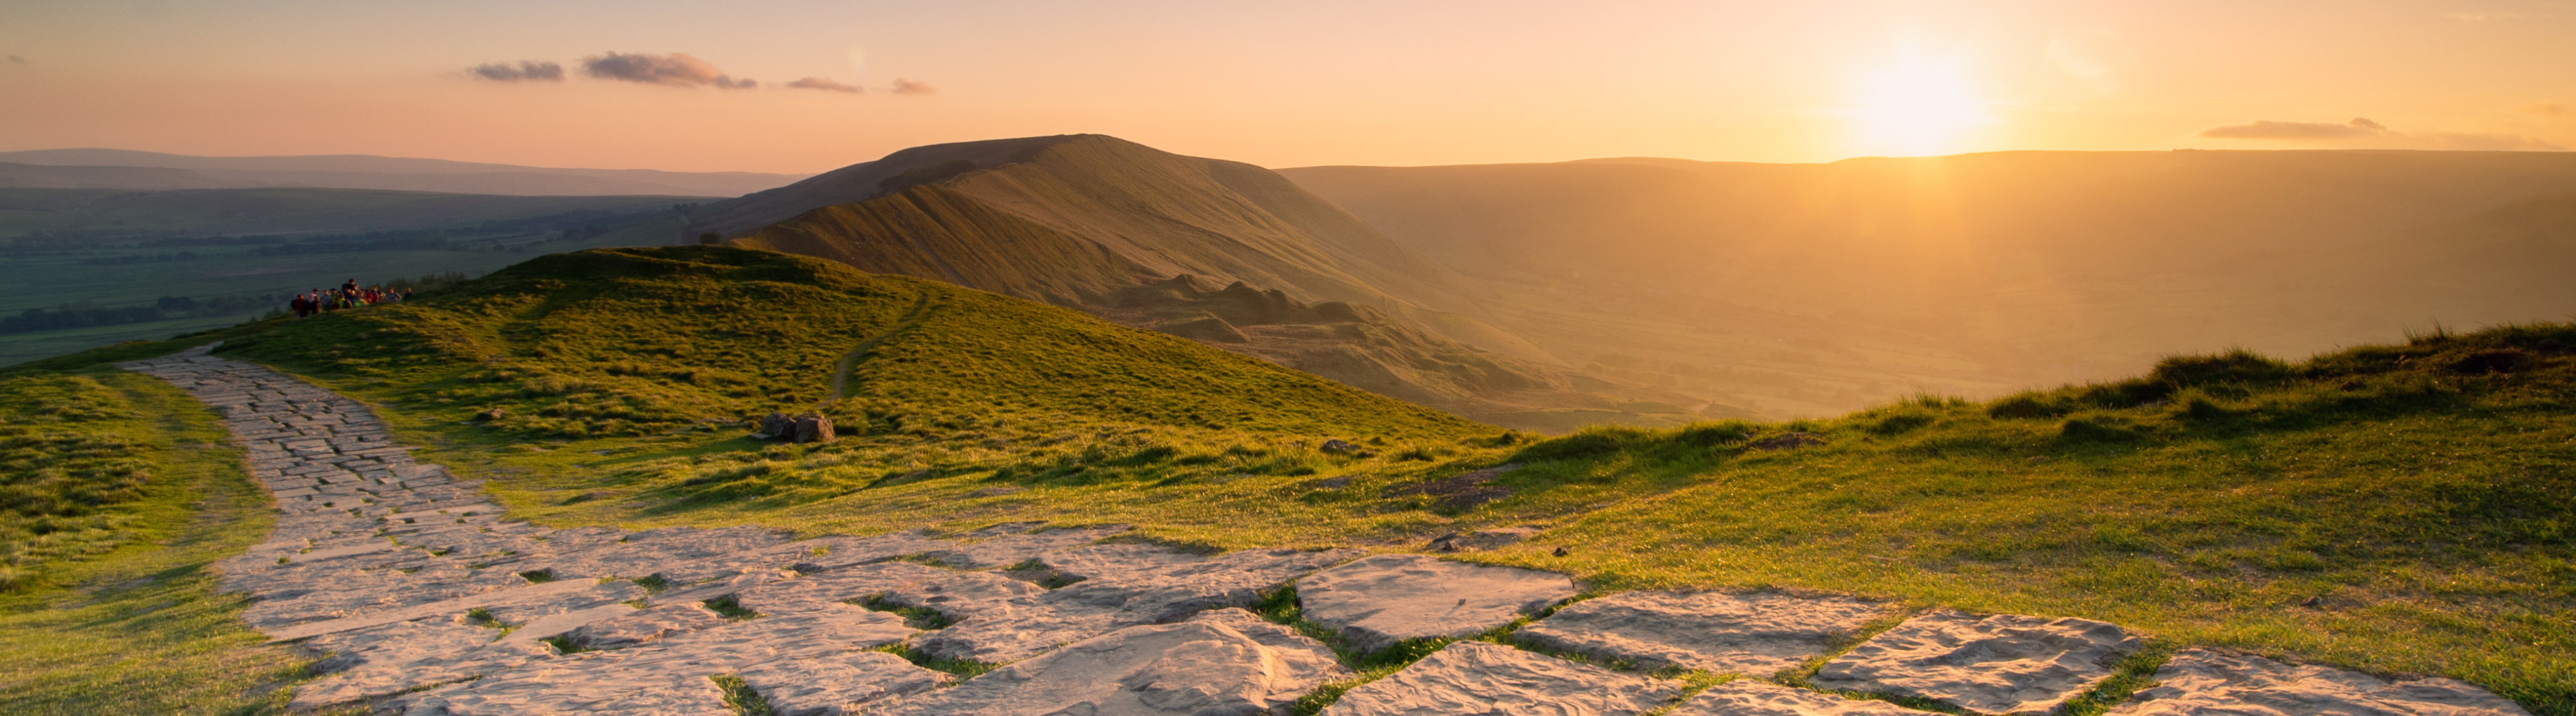 Things to do in the Peak District